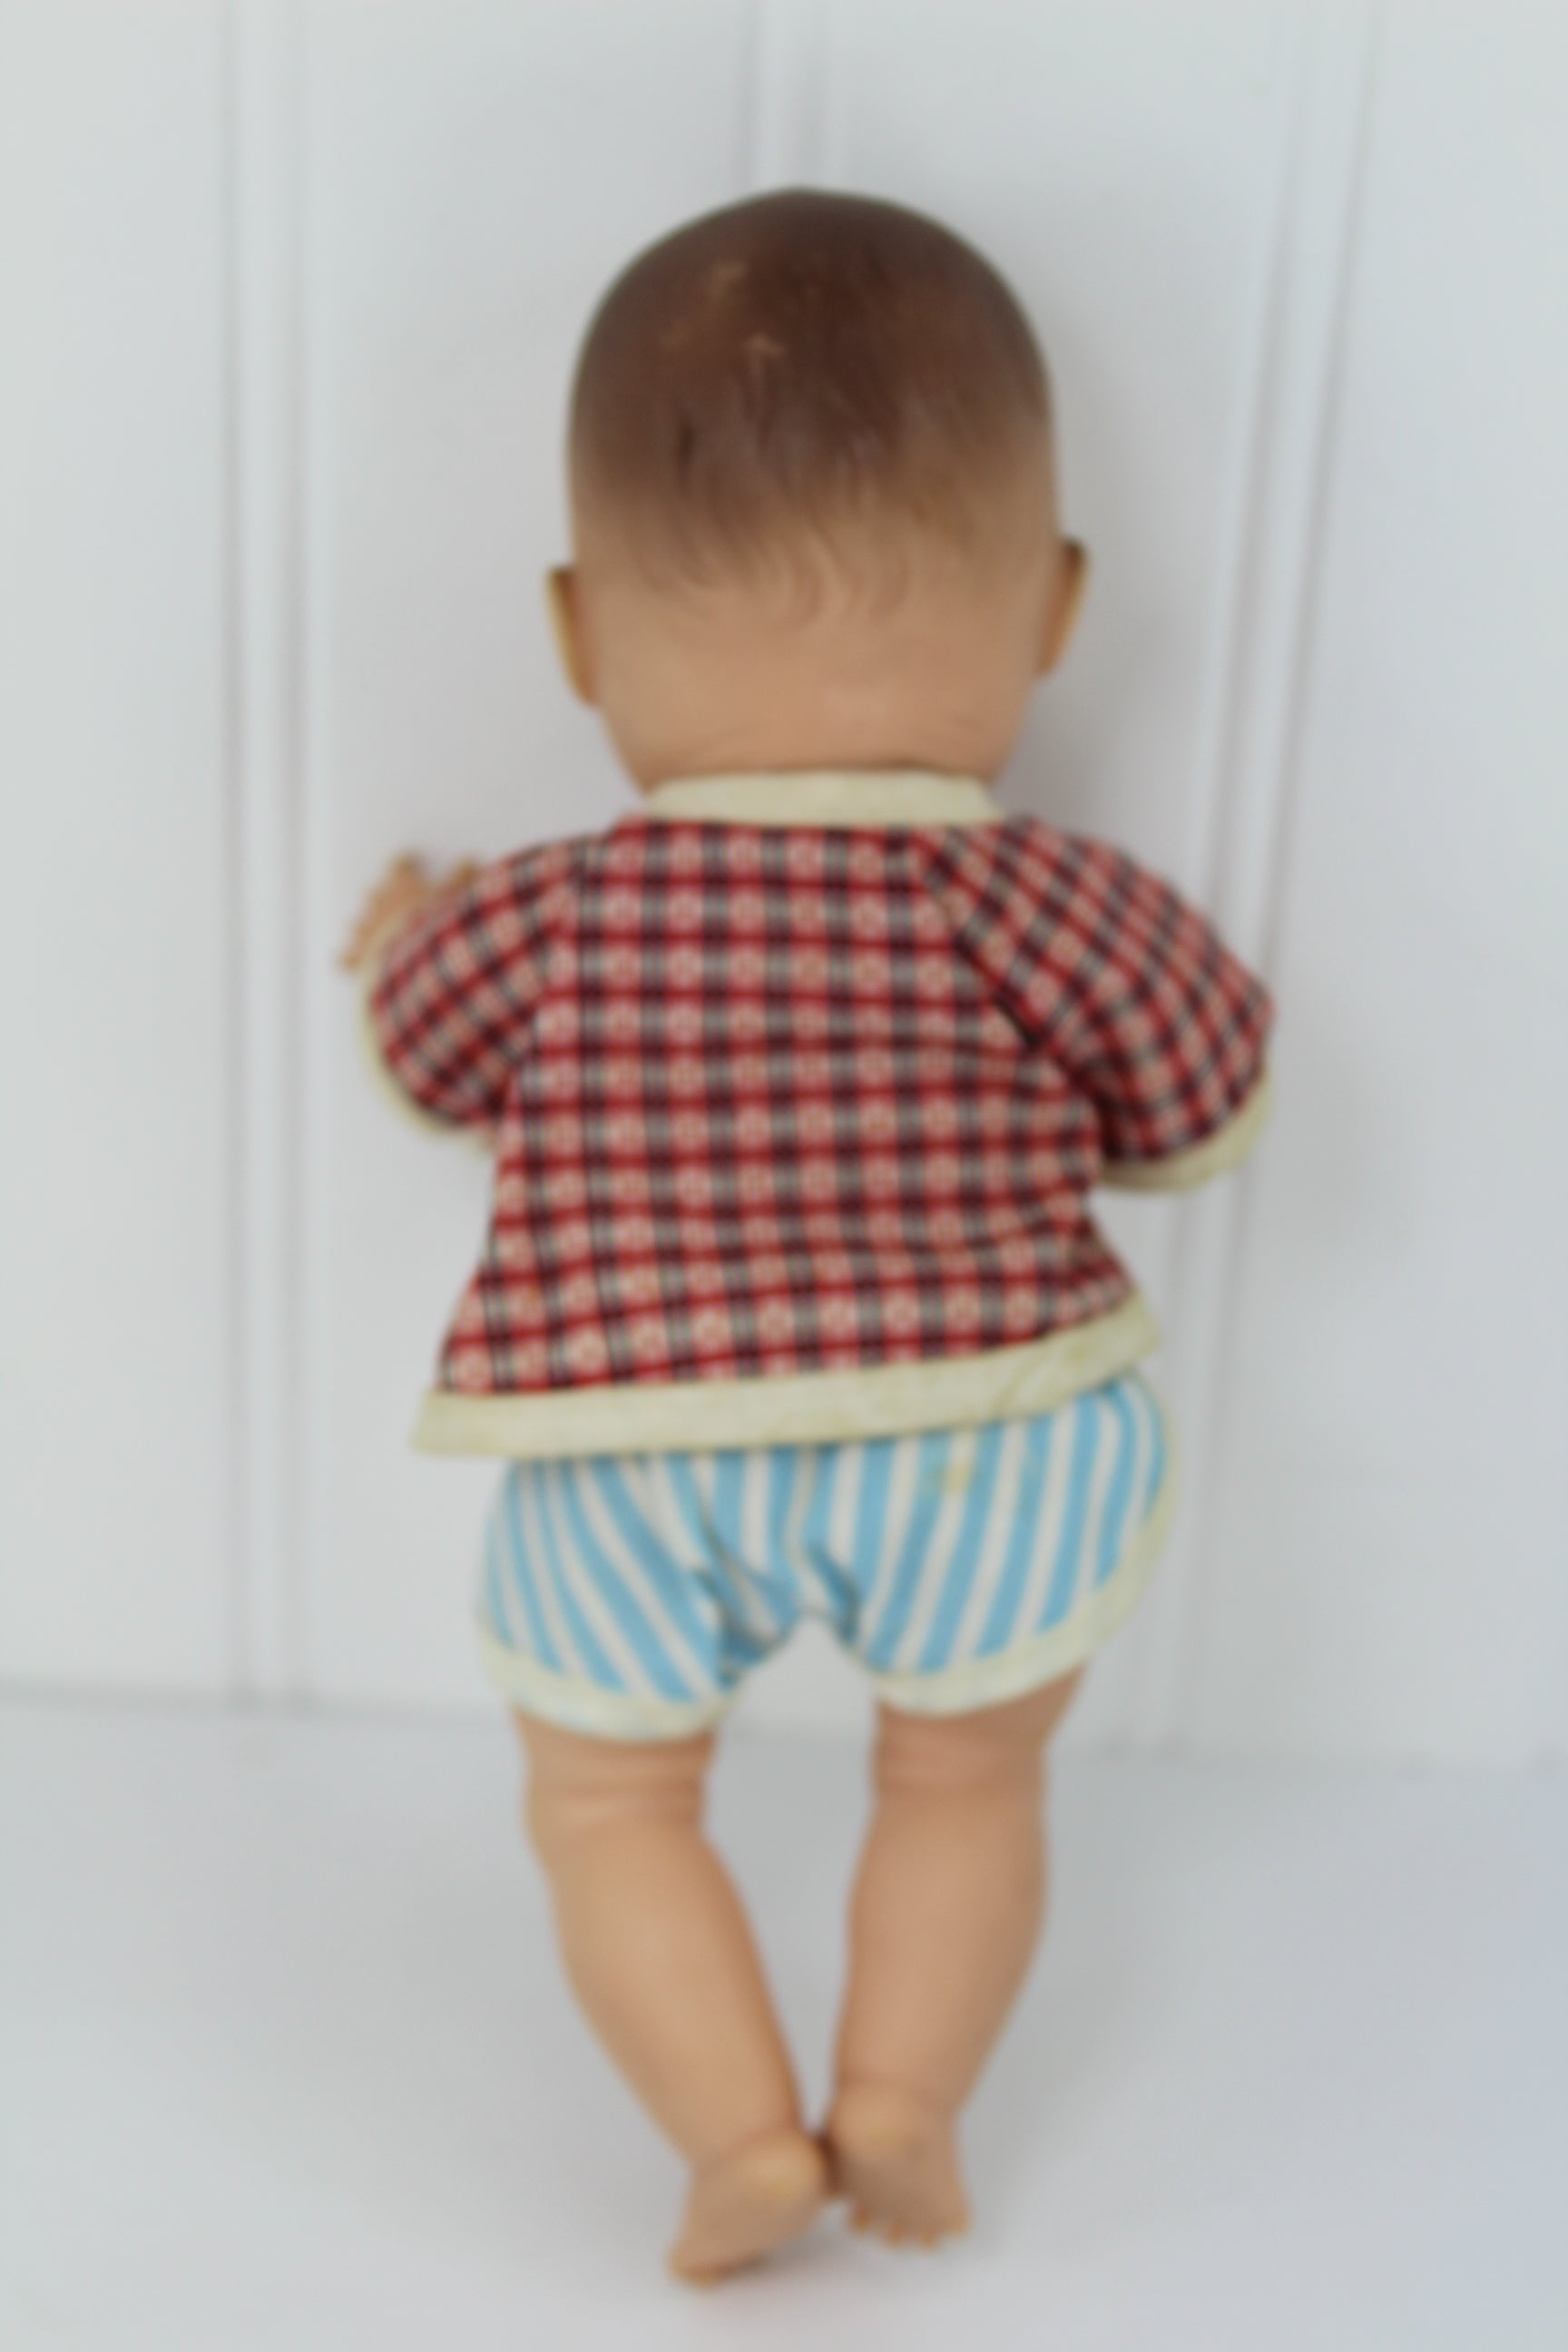 American Character Baby Doll 8" Molded Hair Rooted Lashes Beautiful Face nice condition